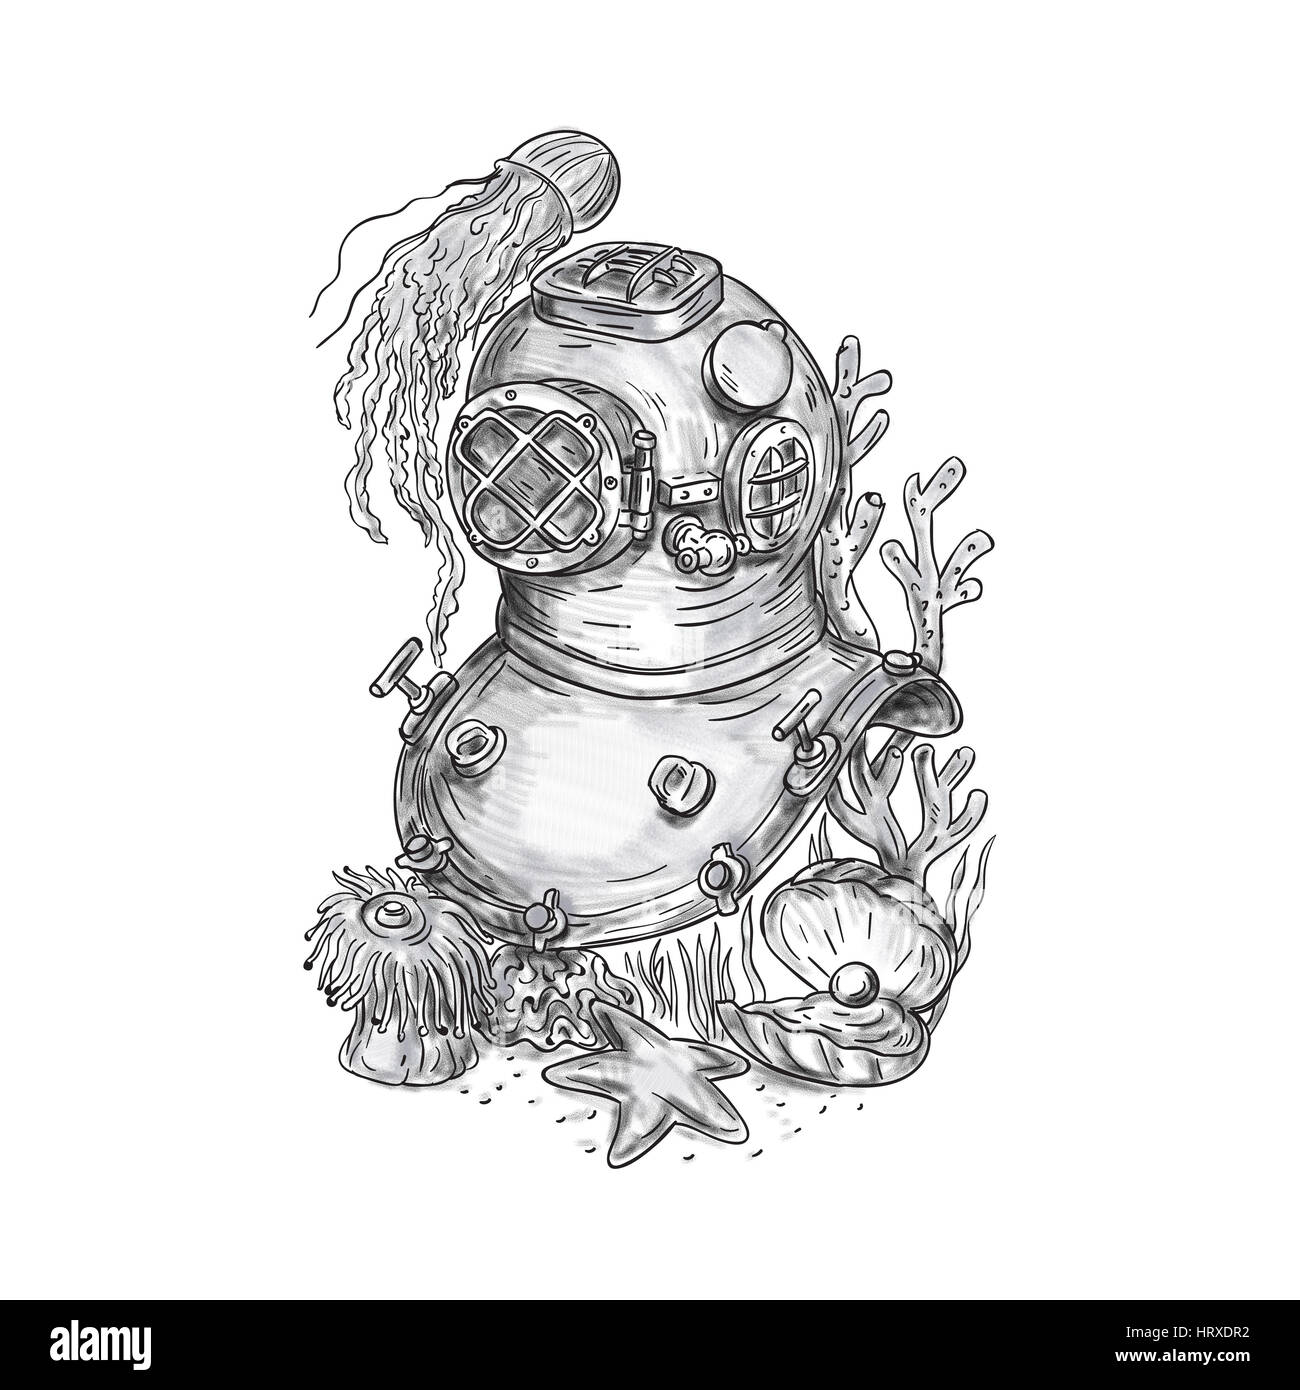 Tattoo style illustration of a copper and brass old school deep sea dive diving helmet or Standard diving helmet (Copper hat), worn mainly by professi Stock Photo